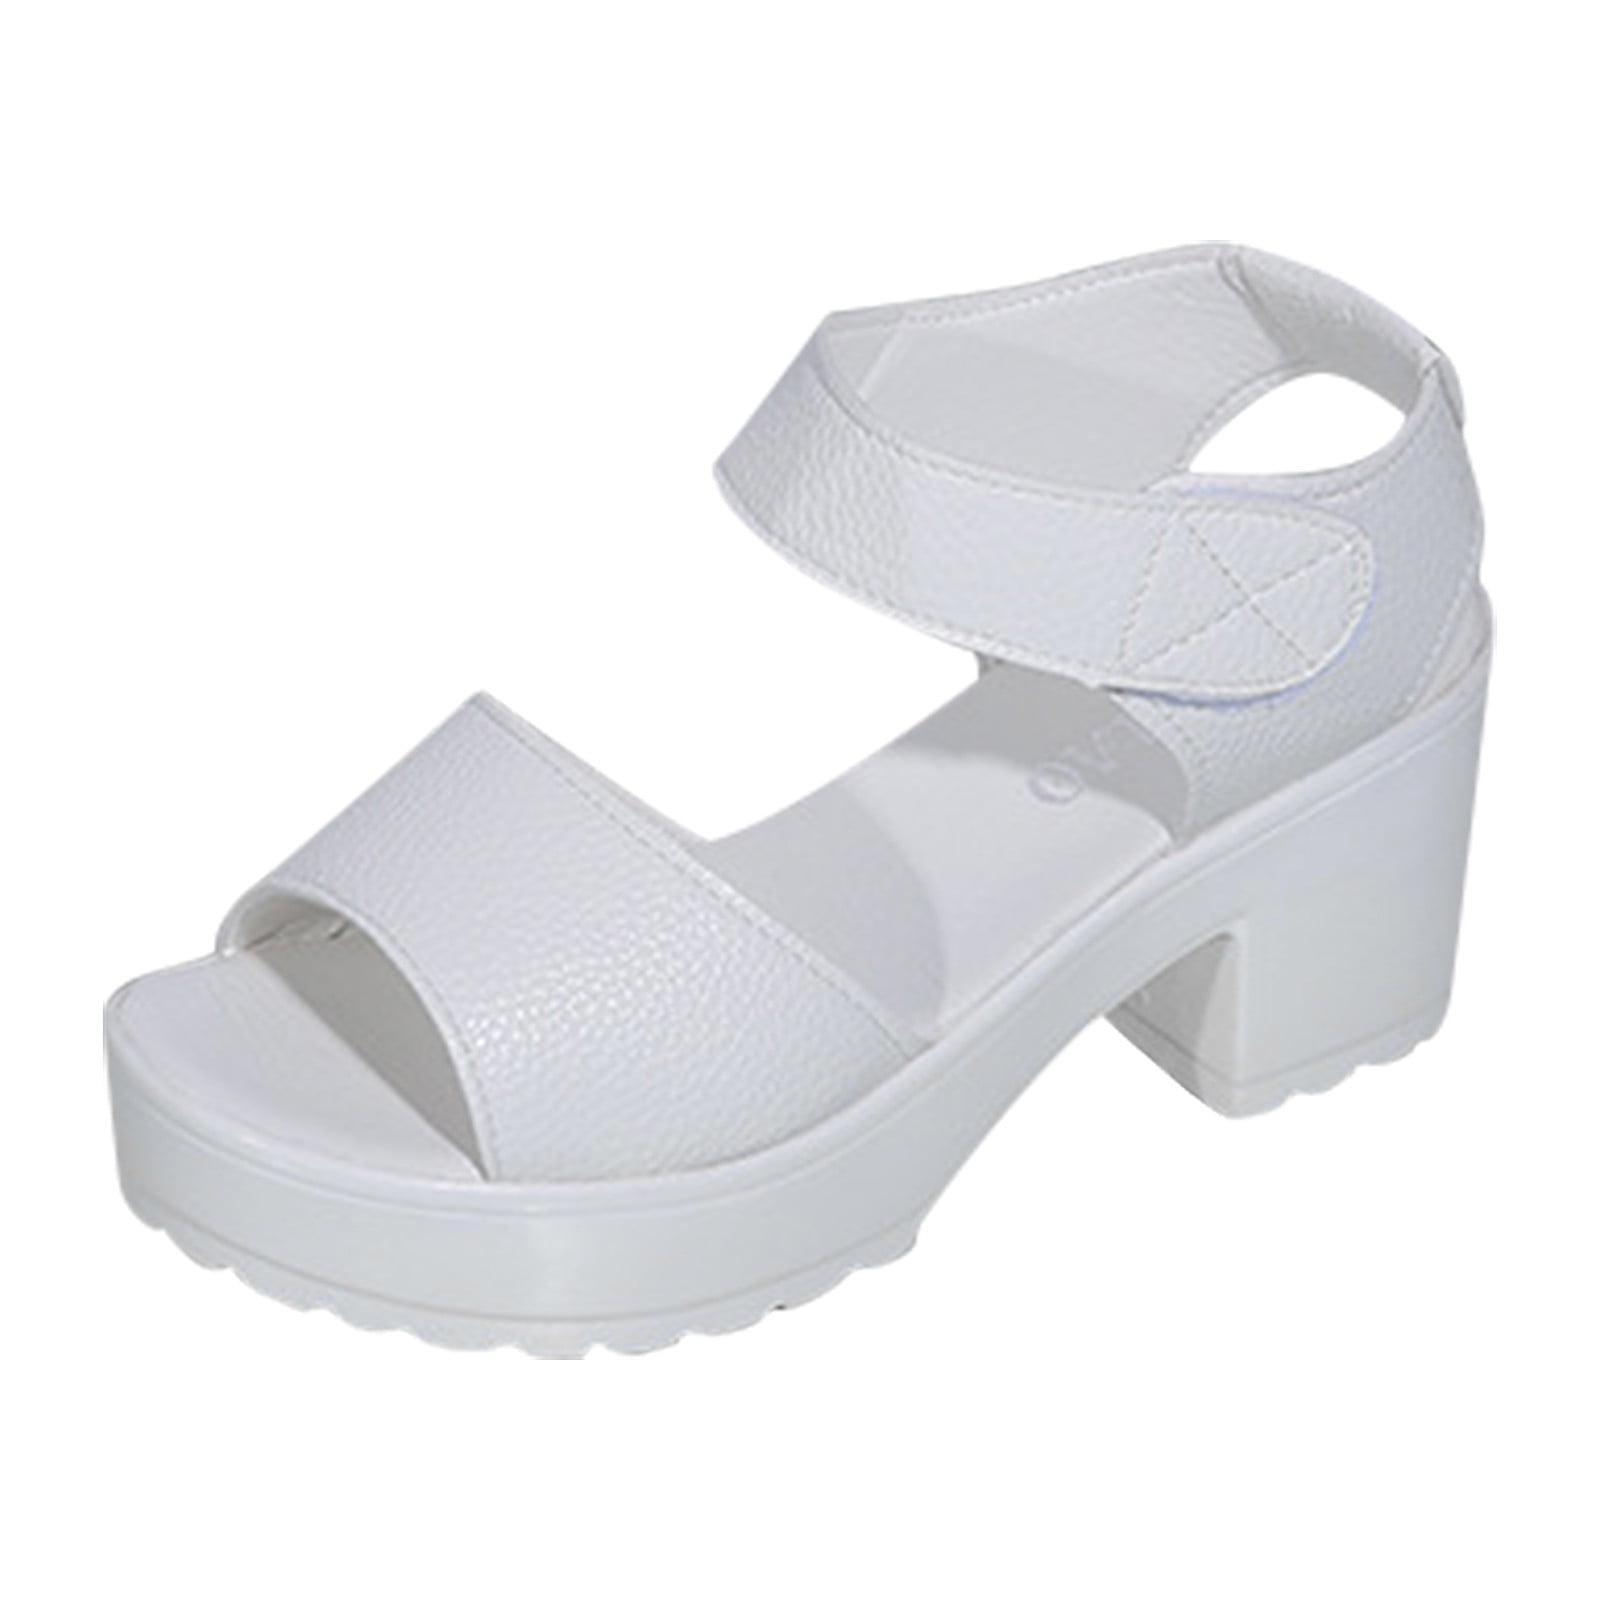 HSMQHJWE White Sandals Gladiator Sandals For Women Open Toe Two Bands ...